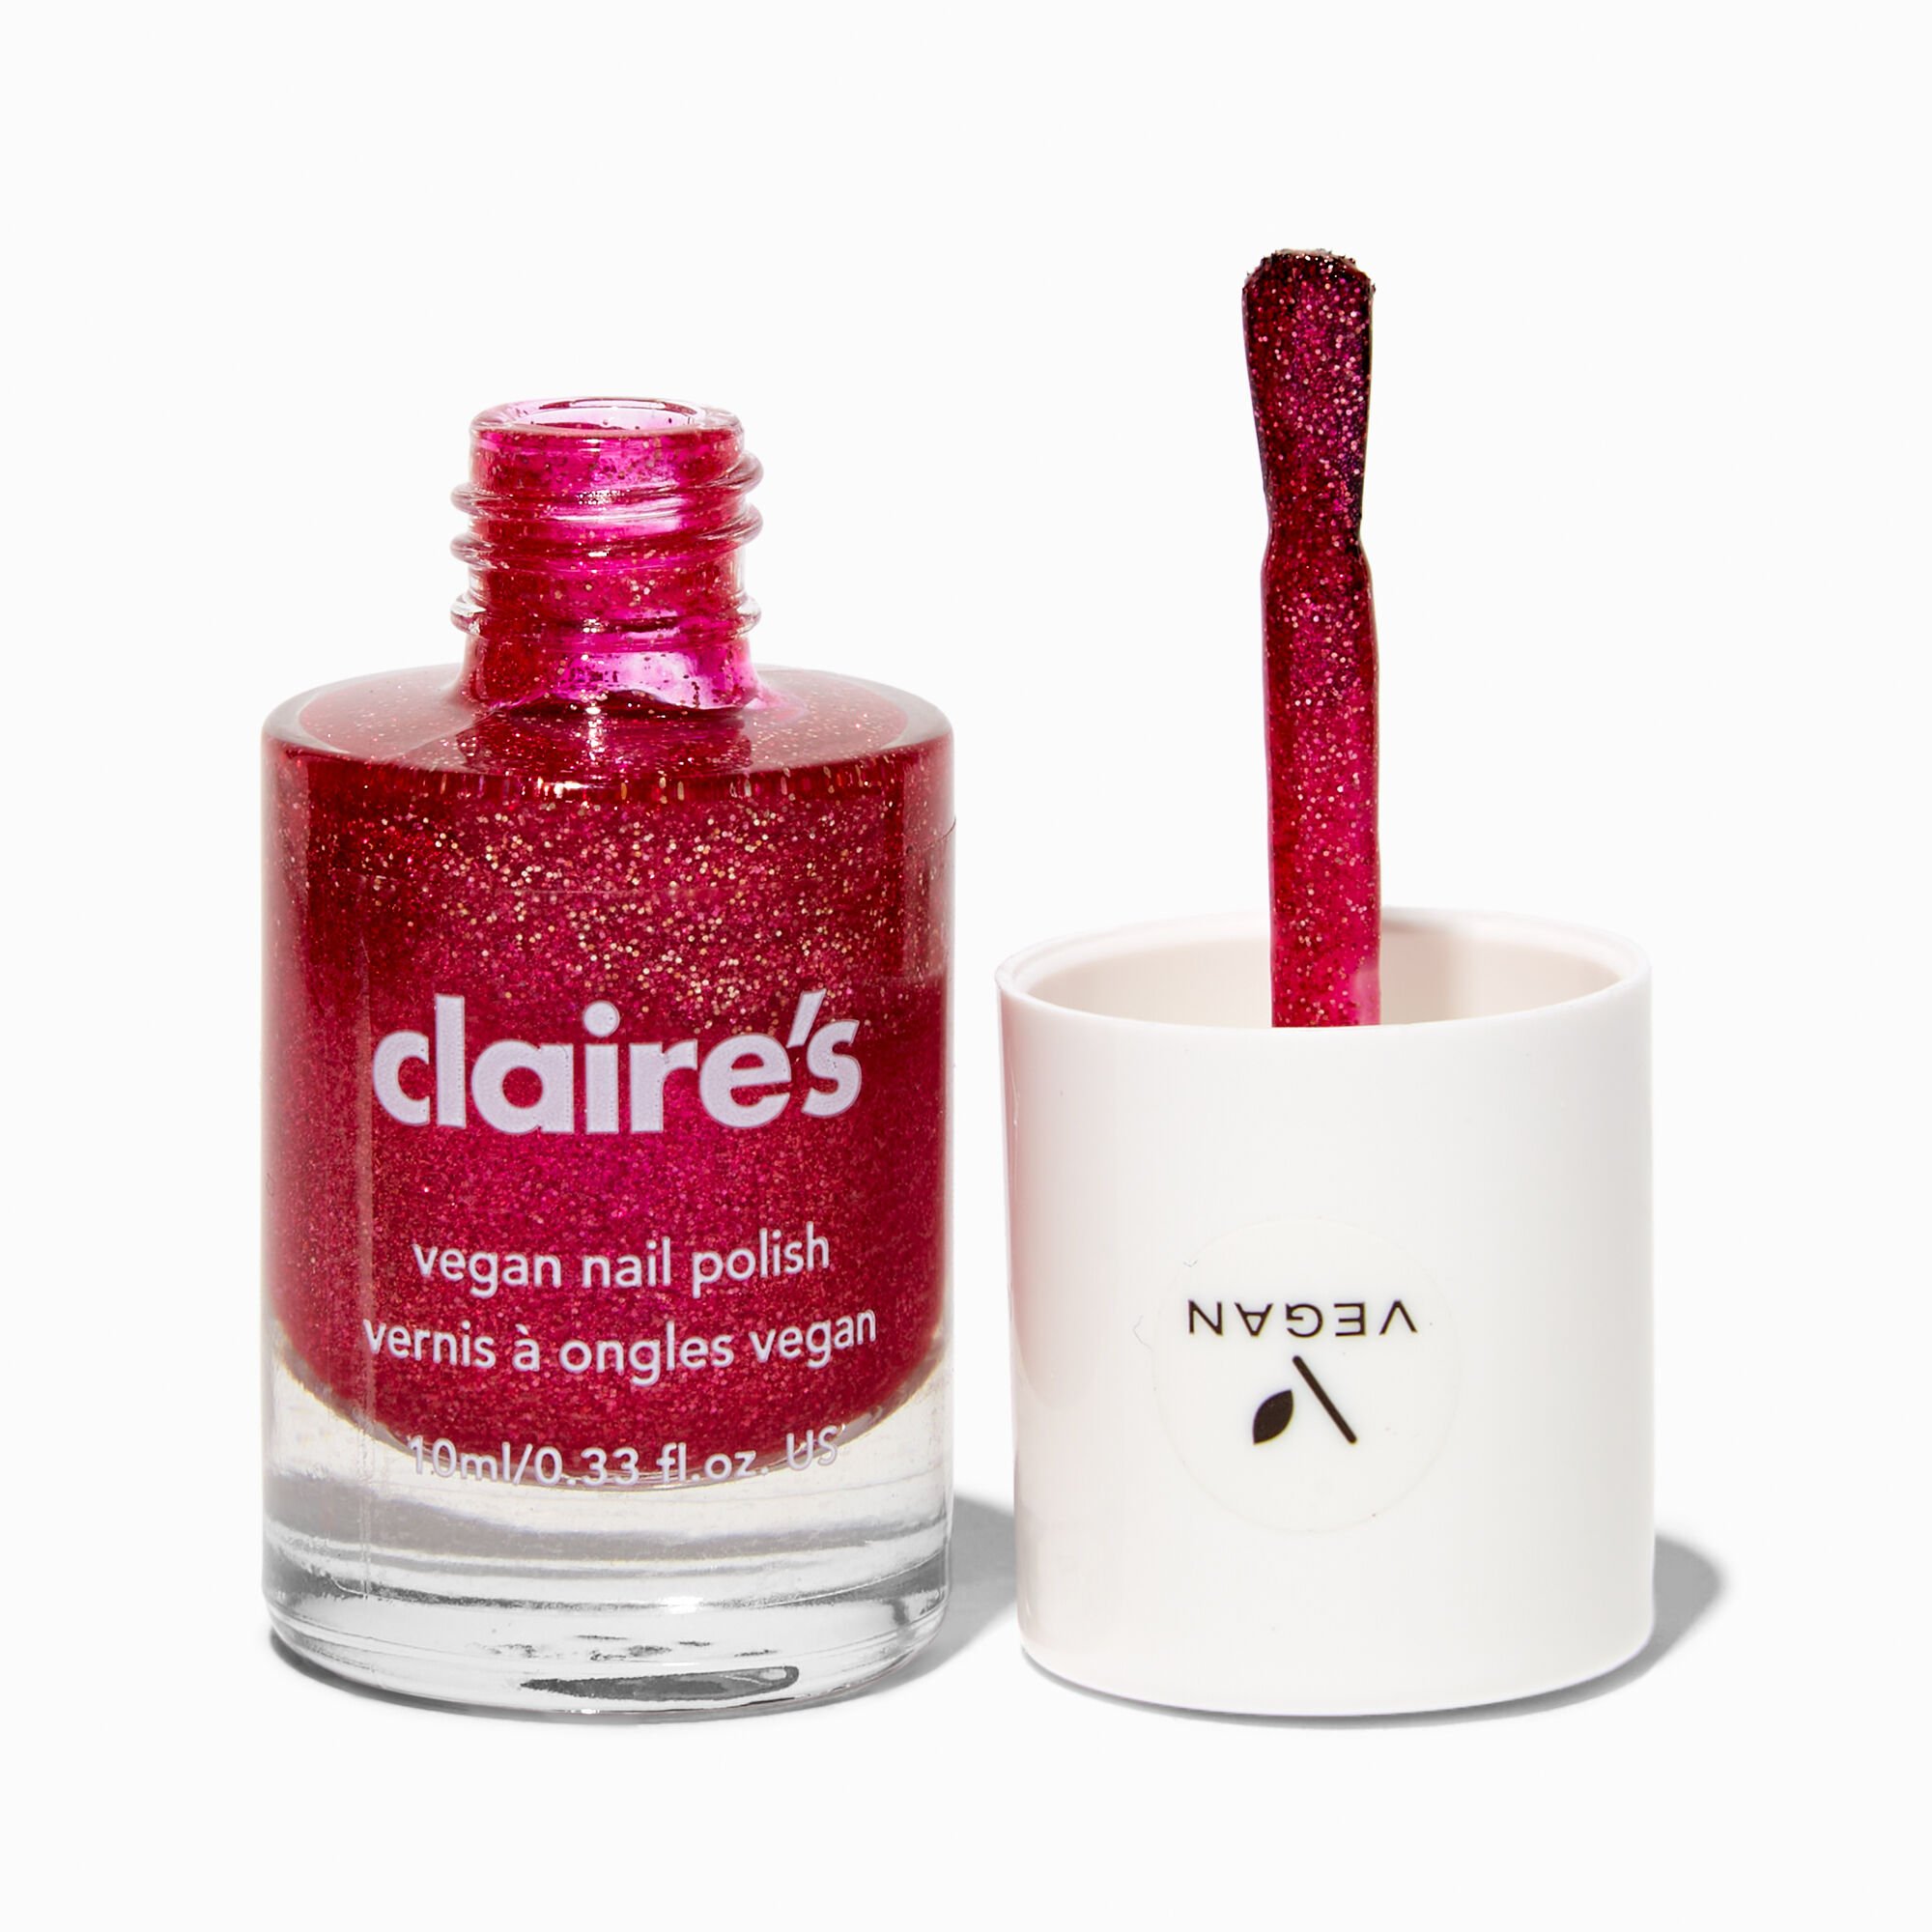 View Claires Vegan Glitter Nail Polish Lovely Date information